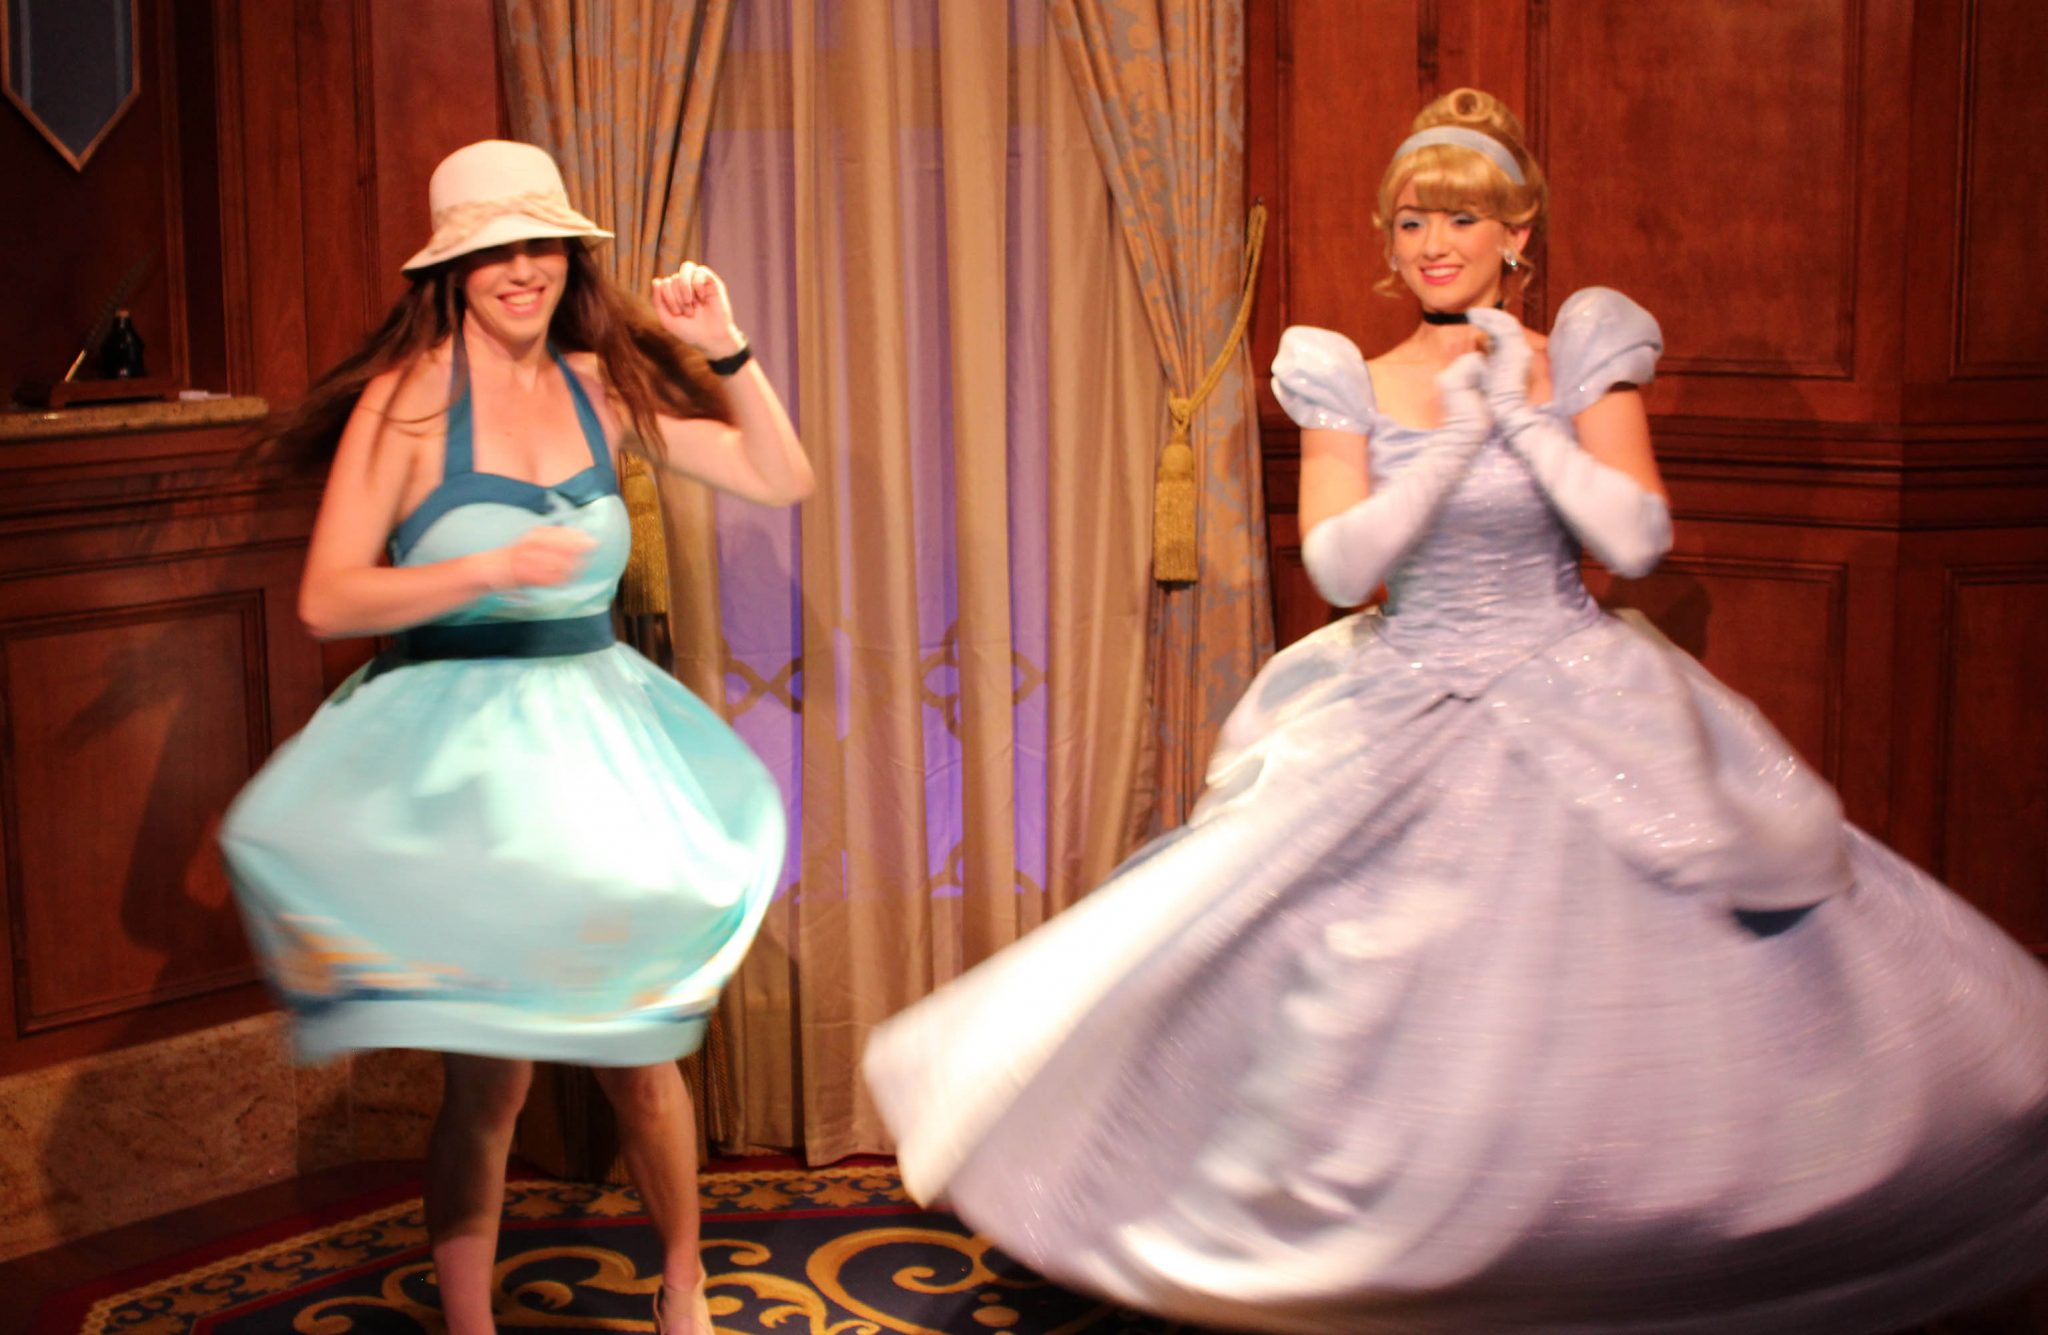 Chelsea twirling in her Dapper Day dress at Princess Fairy Tale Hall with Cinderella.